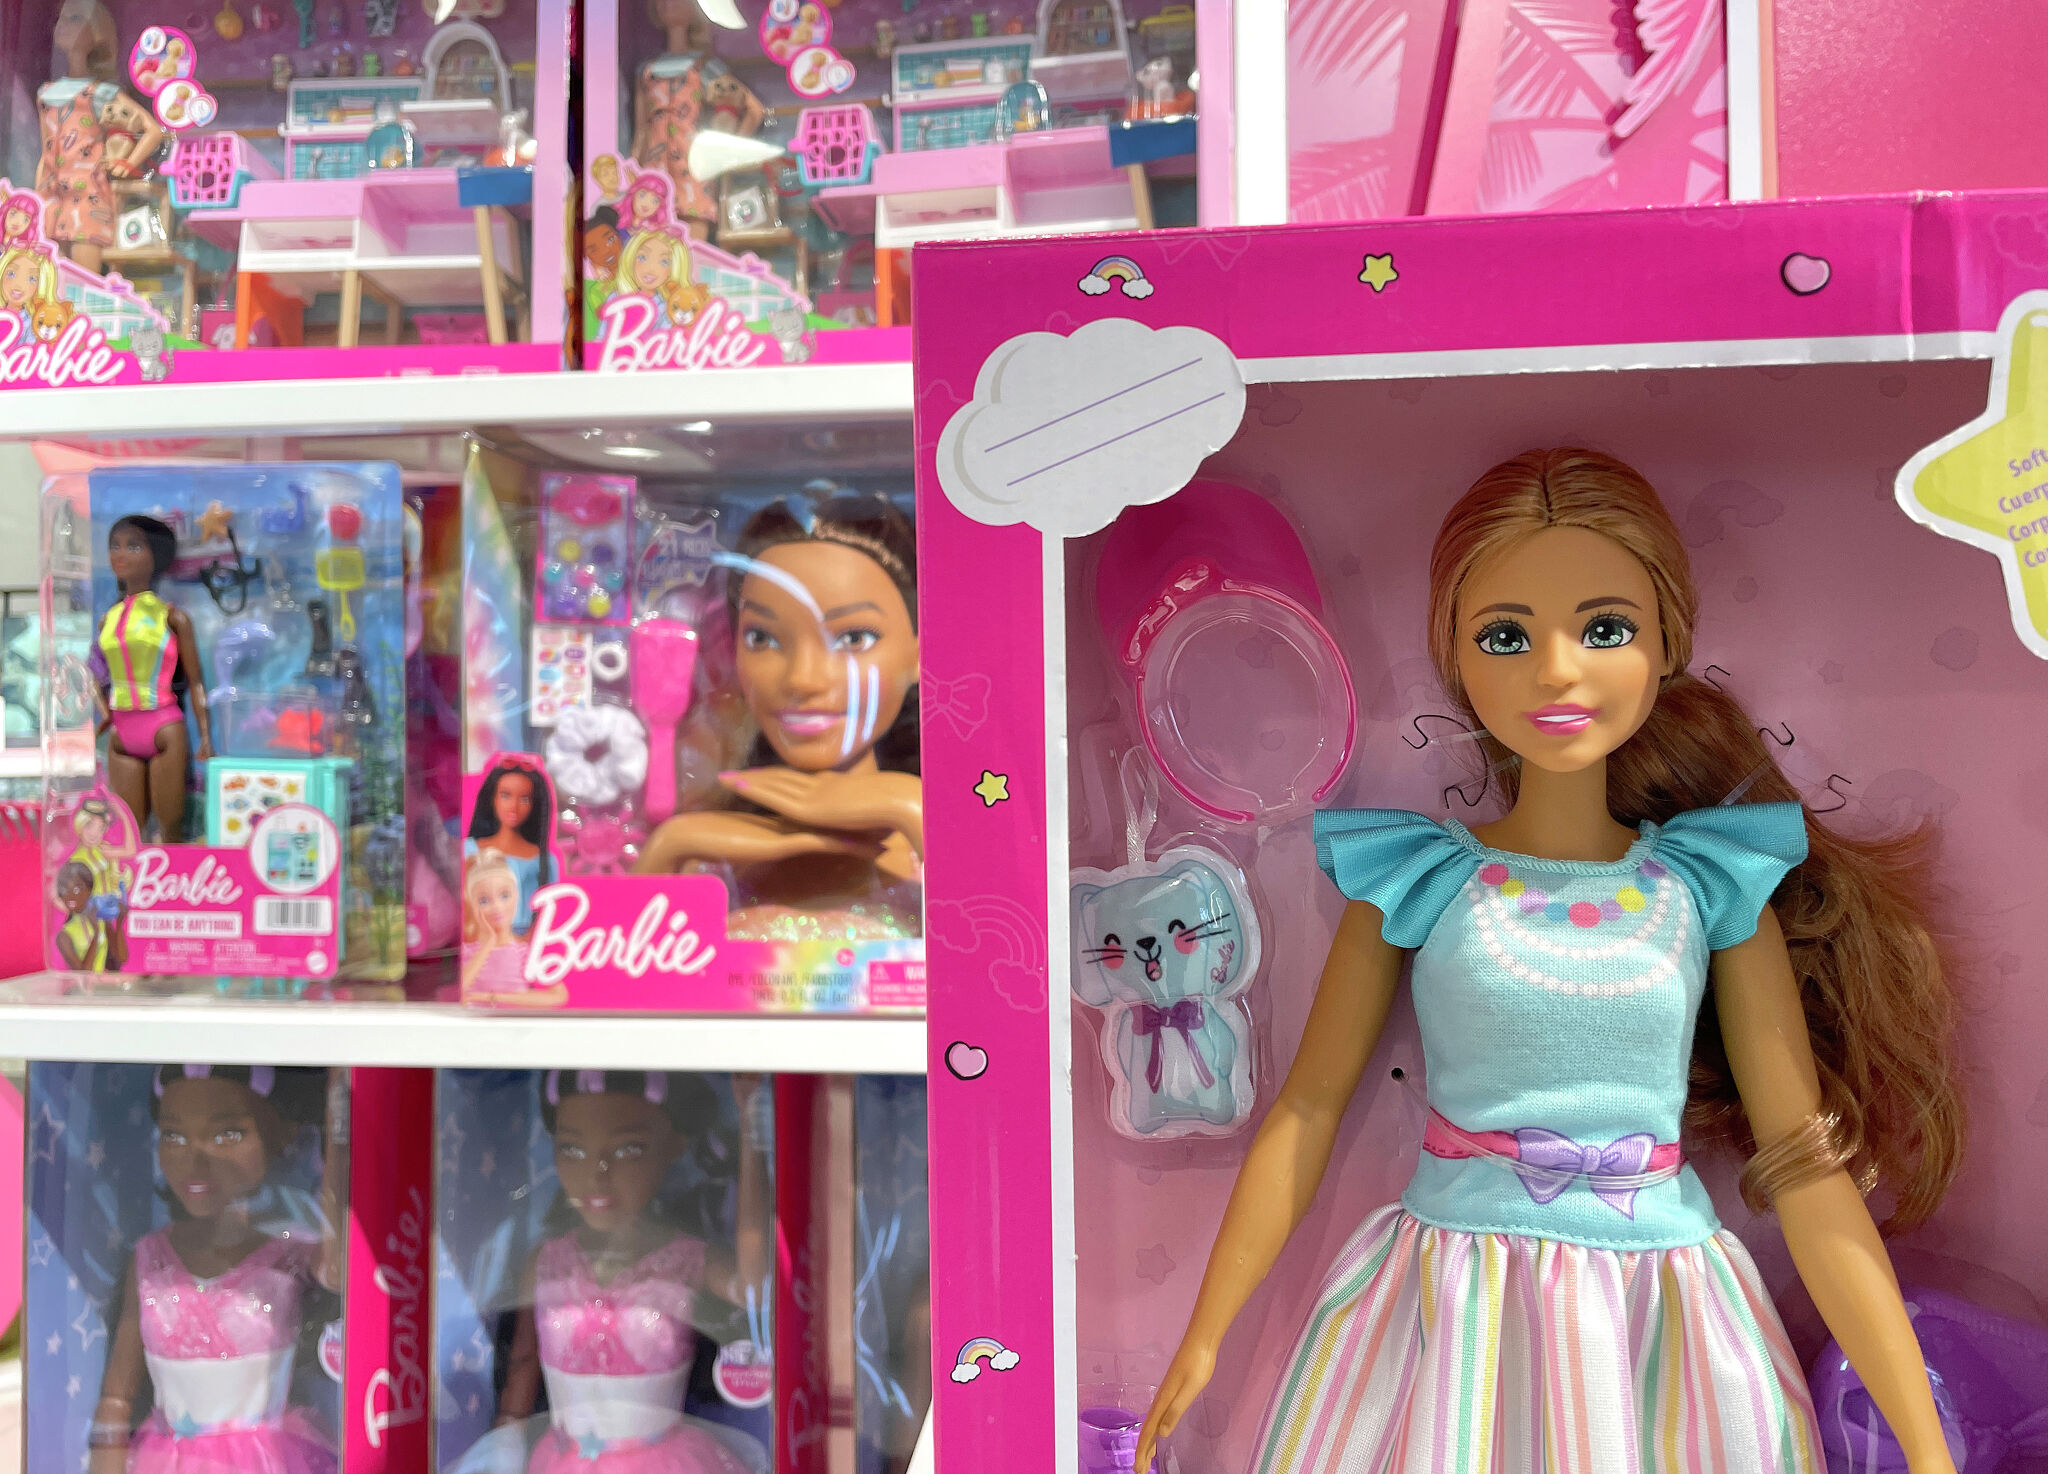 I used to work in a Barbie doll factory. It was no Malibu dream house